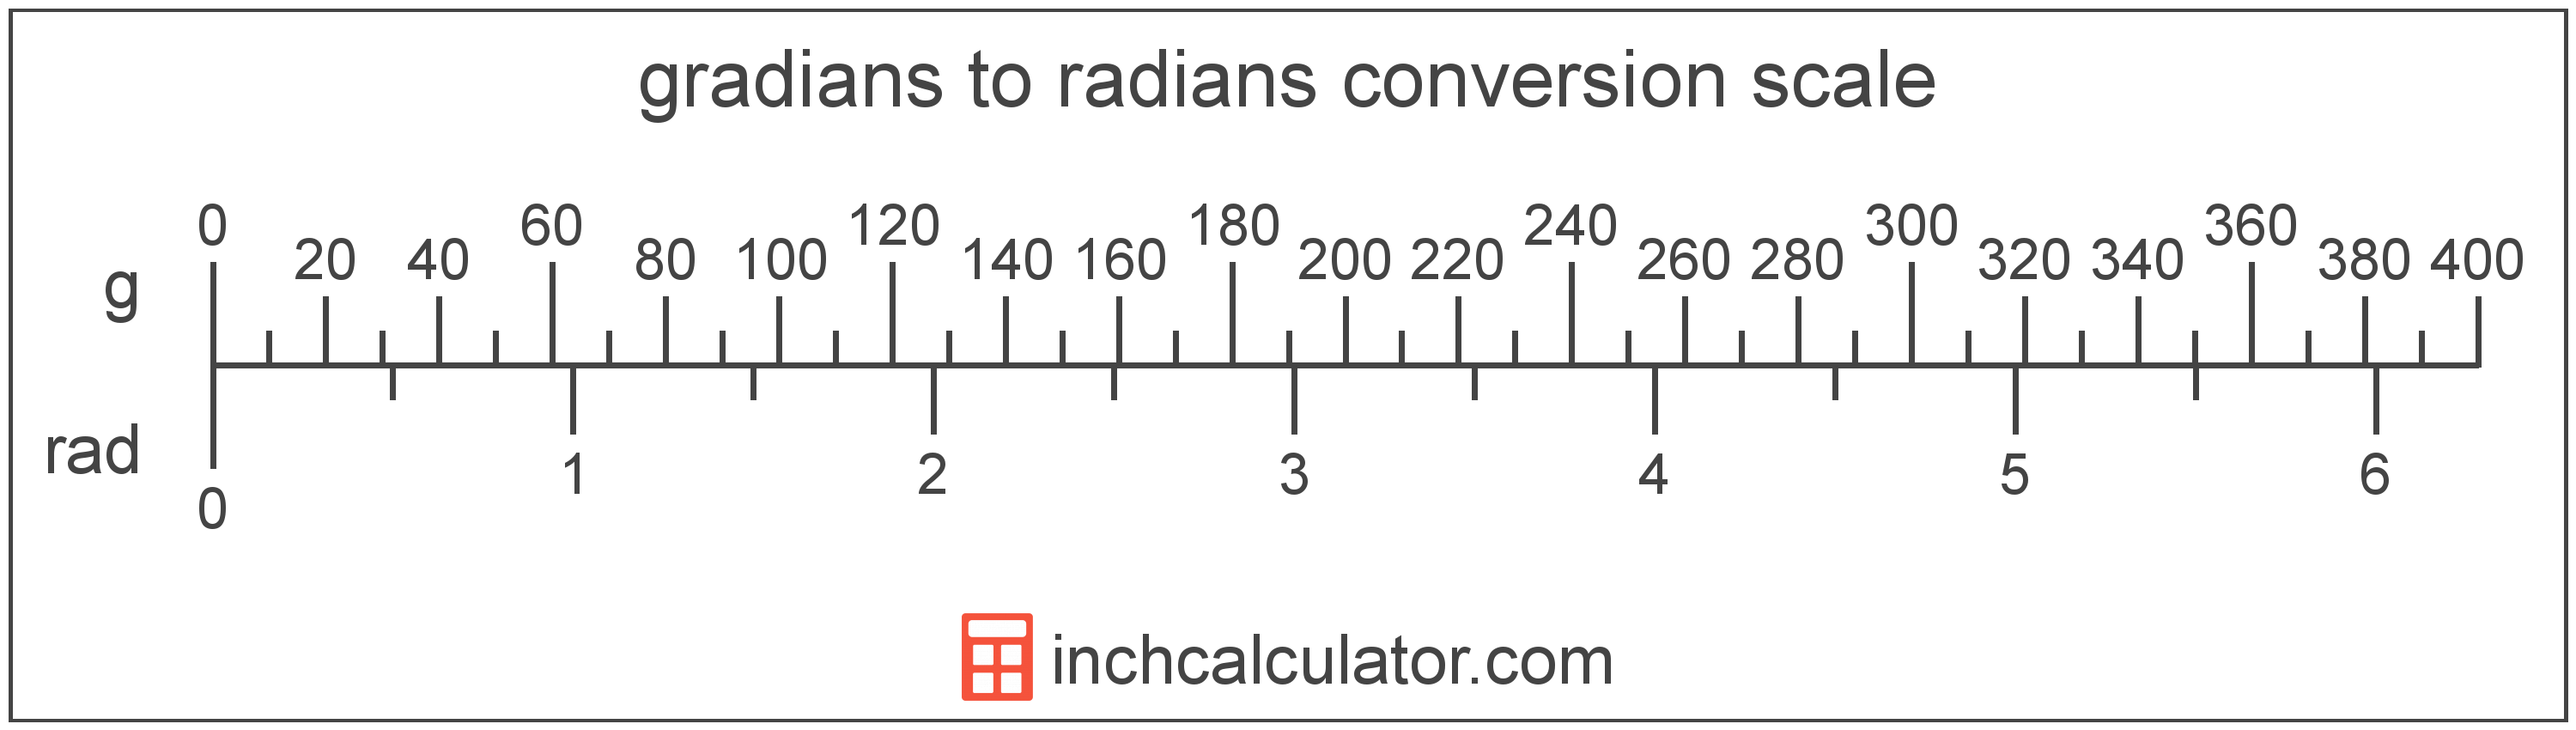 conversion scale showing gradians and equivalent radians angle values